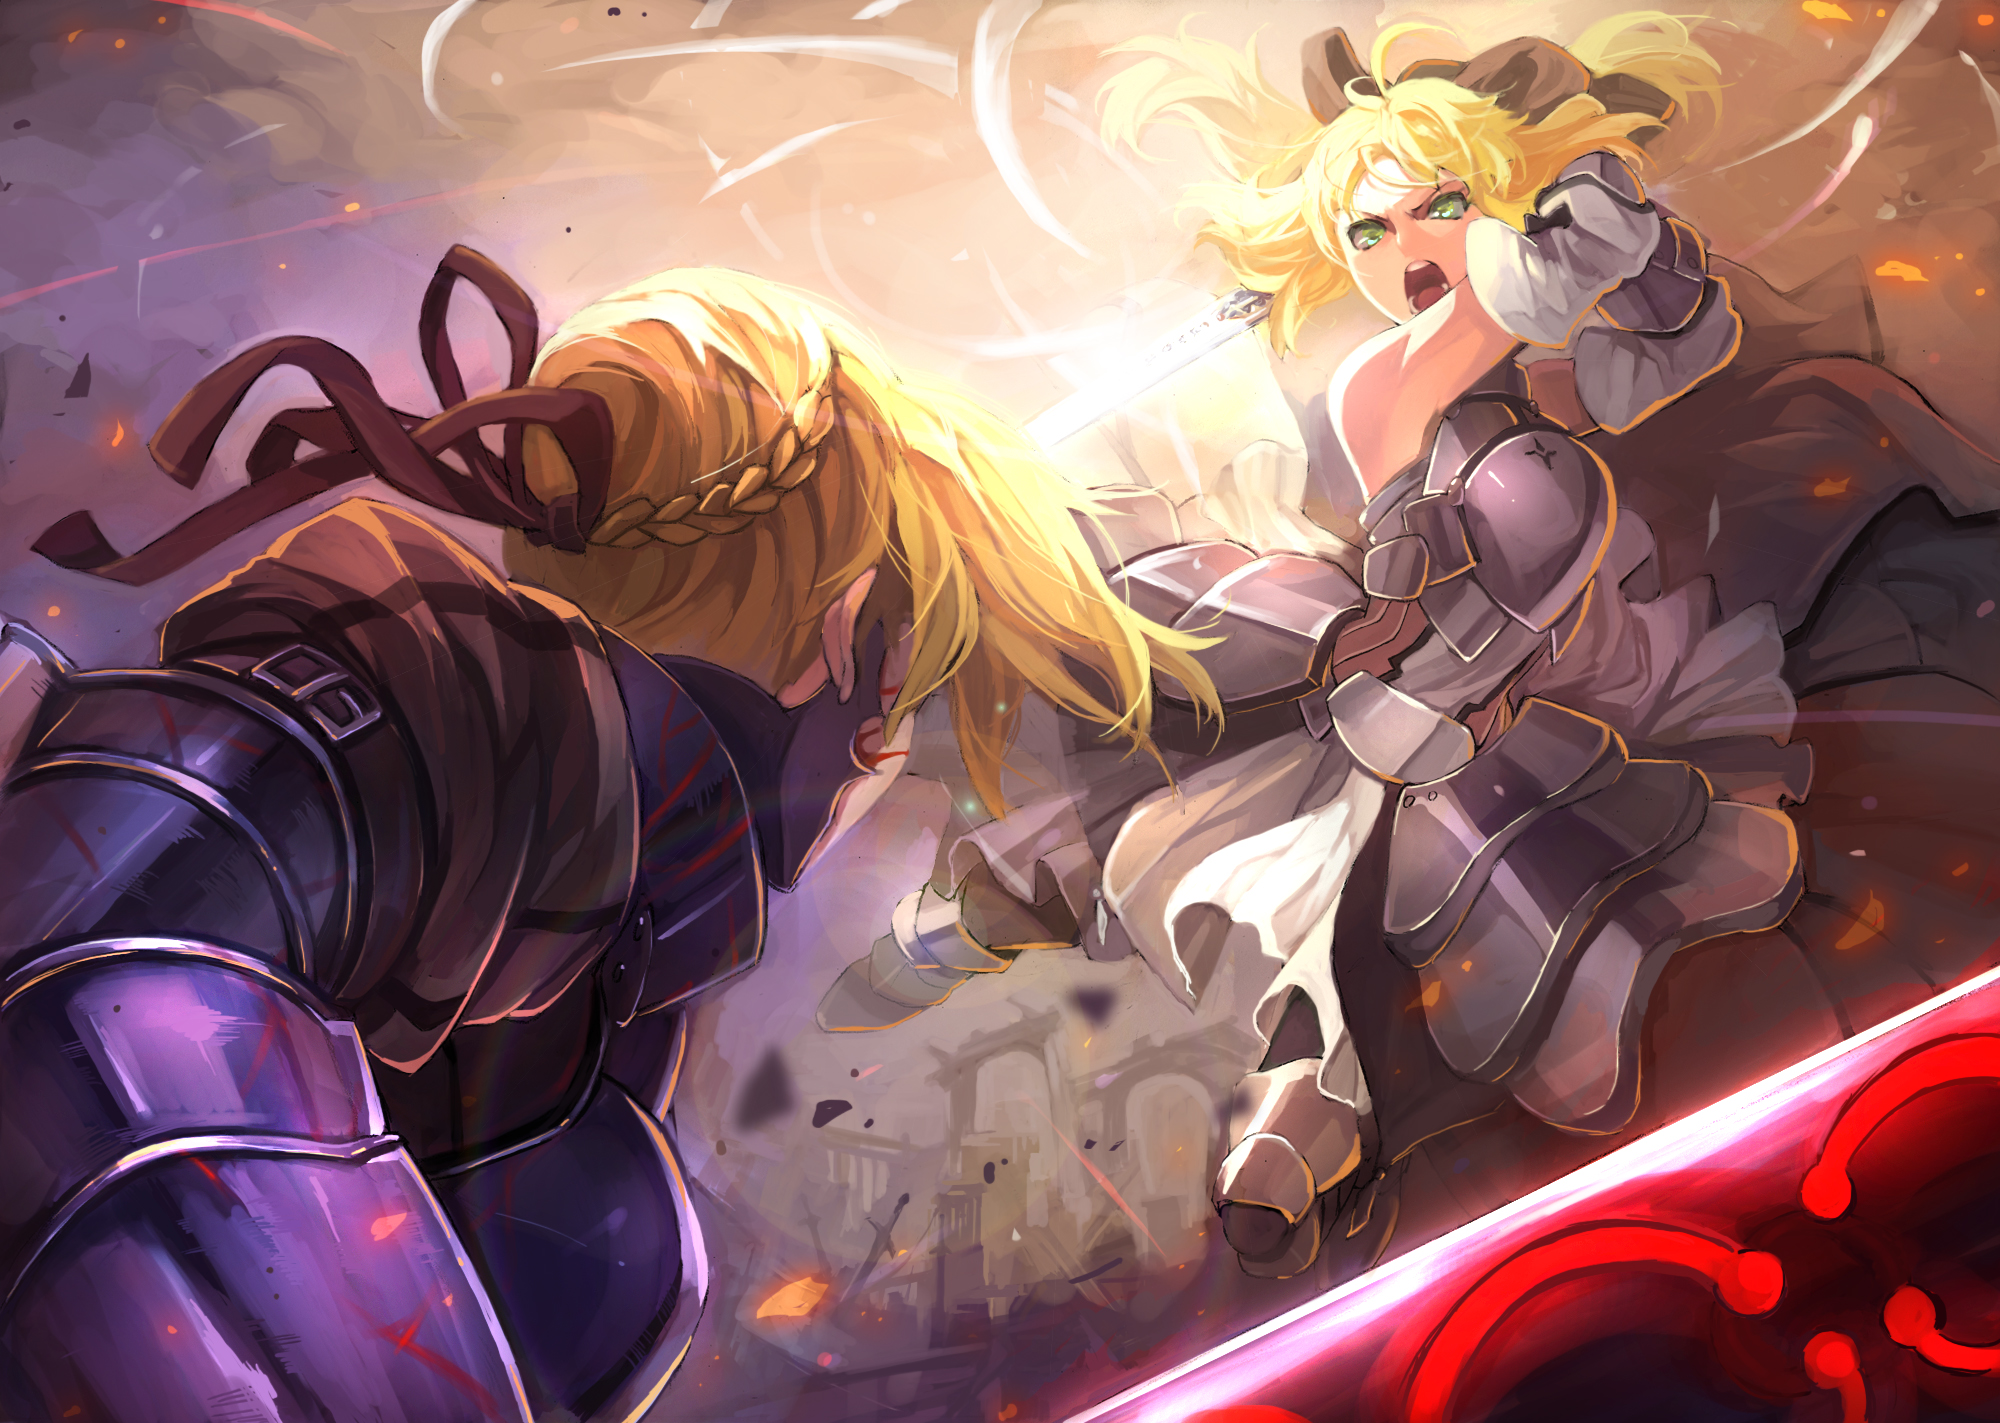 Anime 2000x1423 Fate series Fate/Stay Night Fate/Unlimited Codes  Artoria Pendragon anime girls Saber Alter Saber Lily blonde armor sword